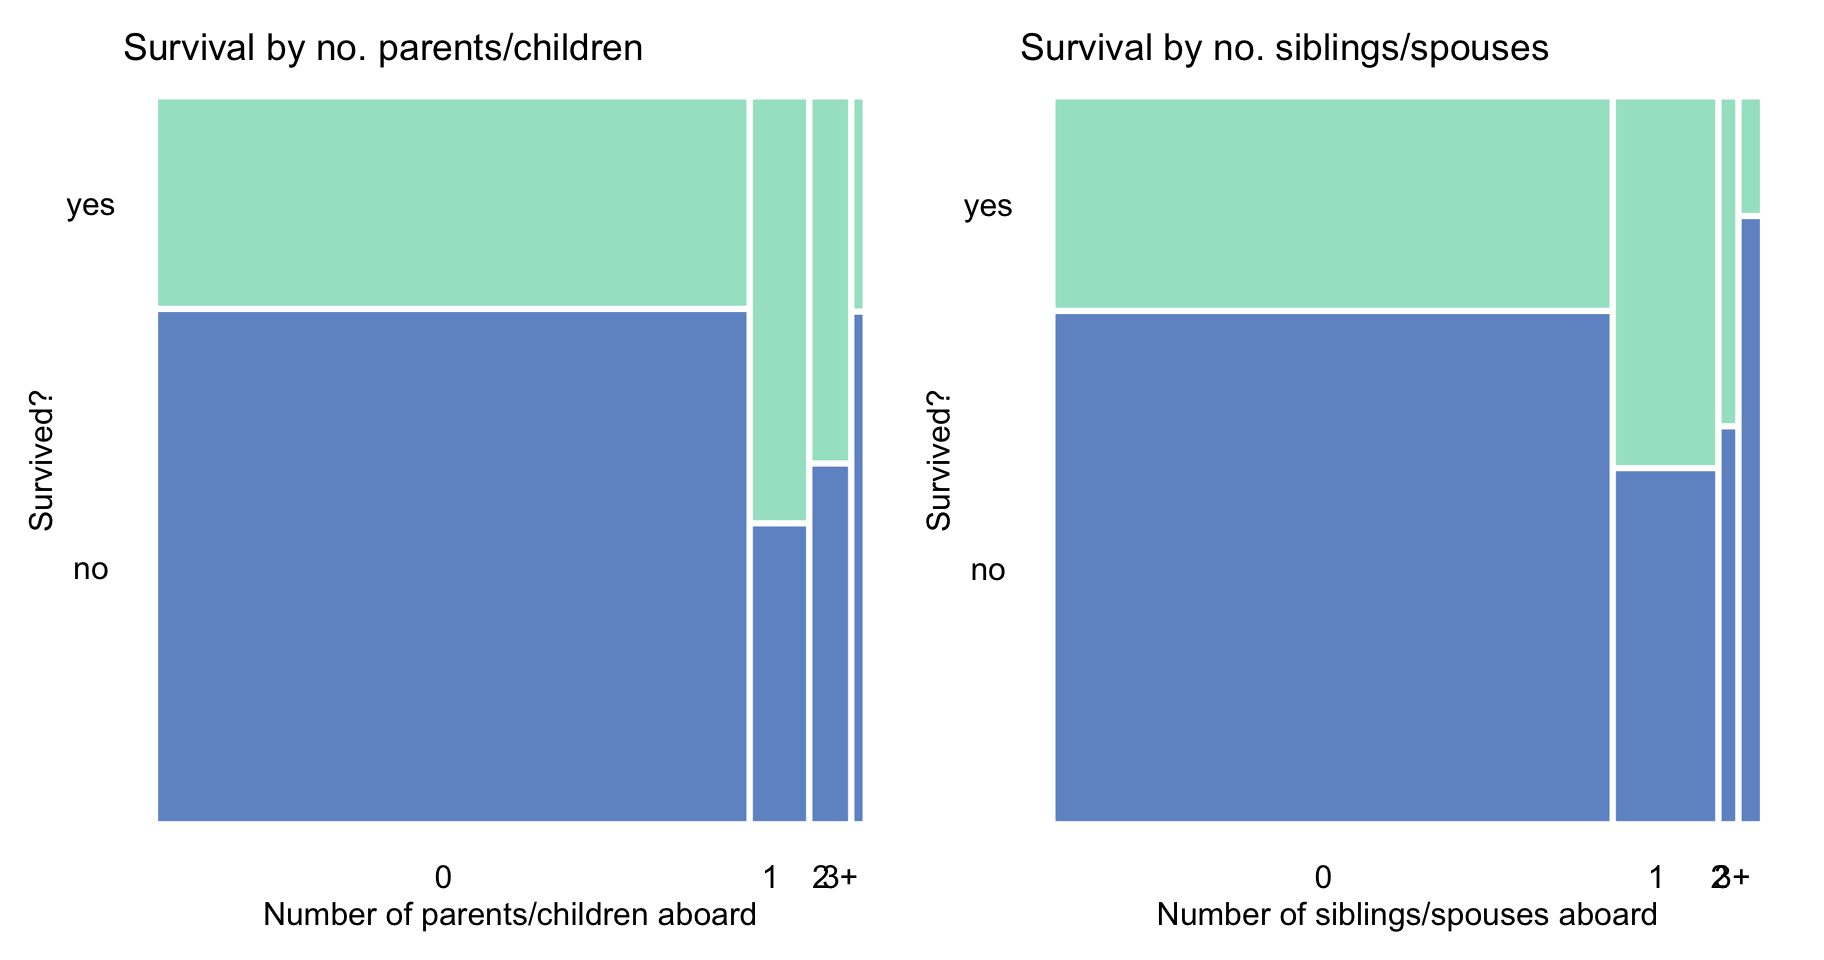 Survival according to the number of parents/children and siblings/spouses in the Titanic data.